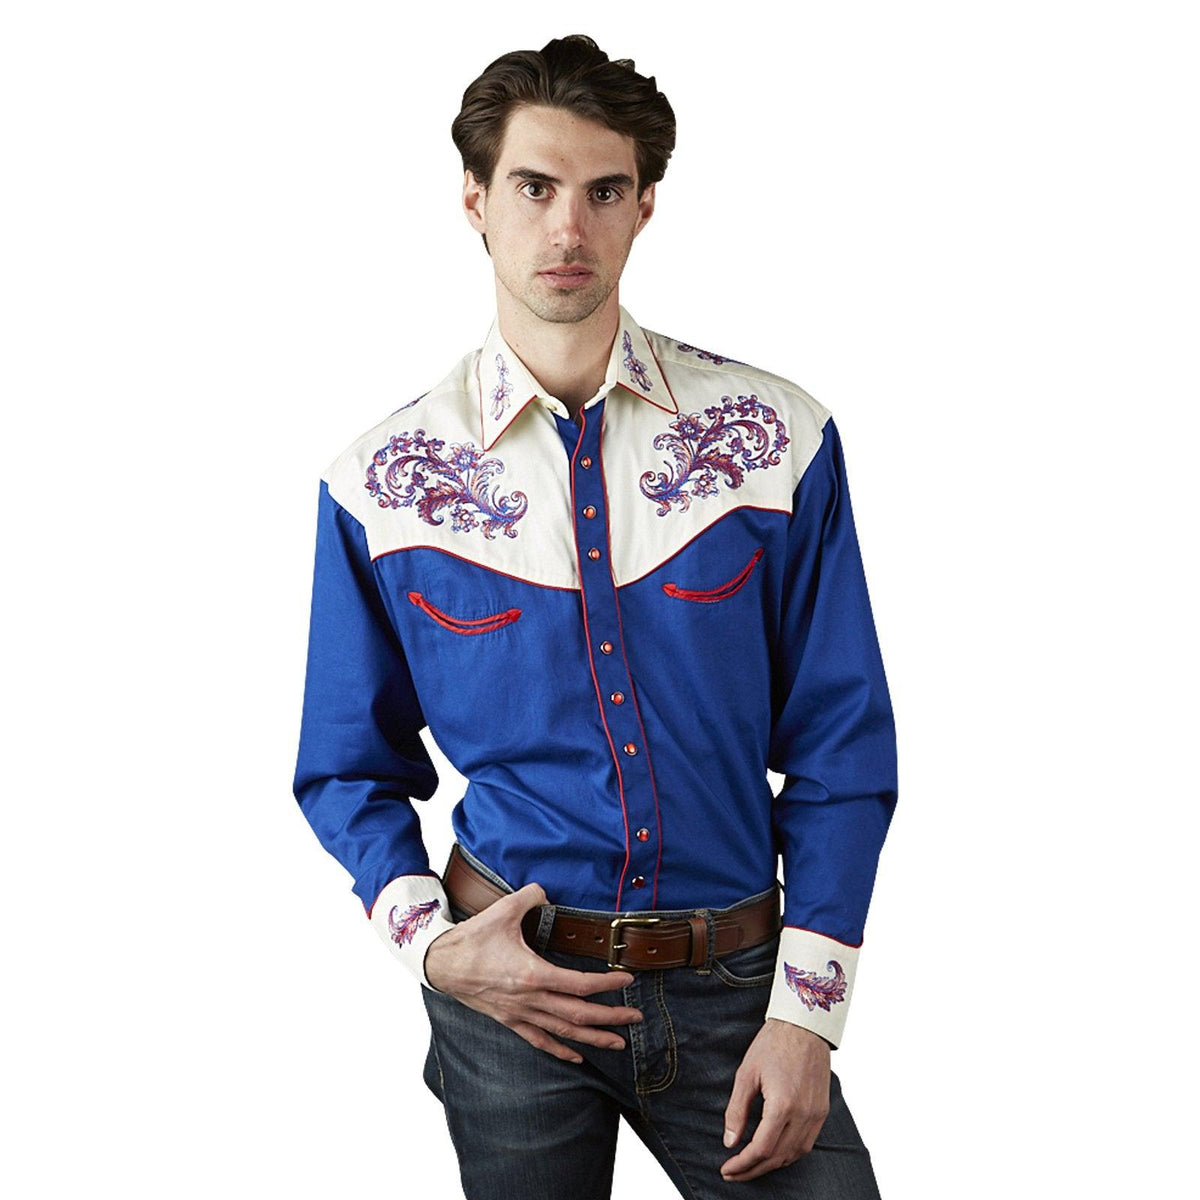 Men’s Vintage 2-Tone Royal Blue & White Western Shirt with Floral Embroidery - Flyclothing LLC